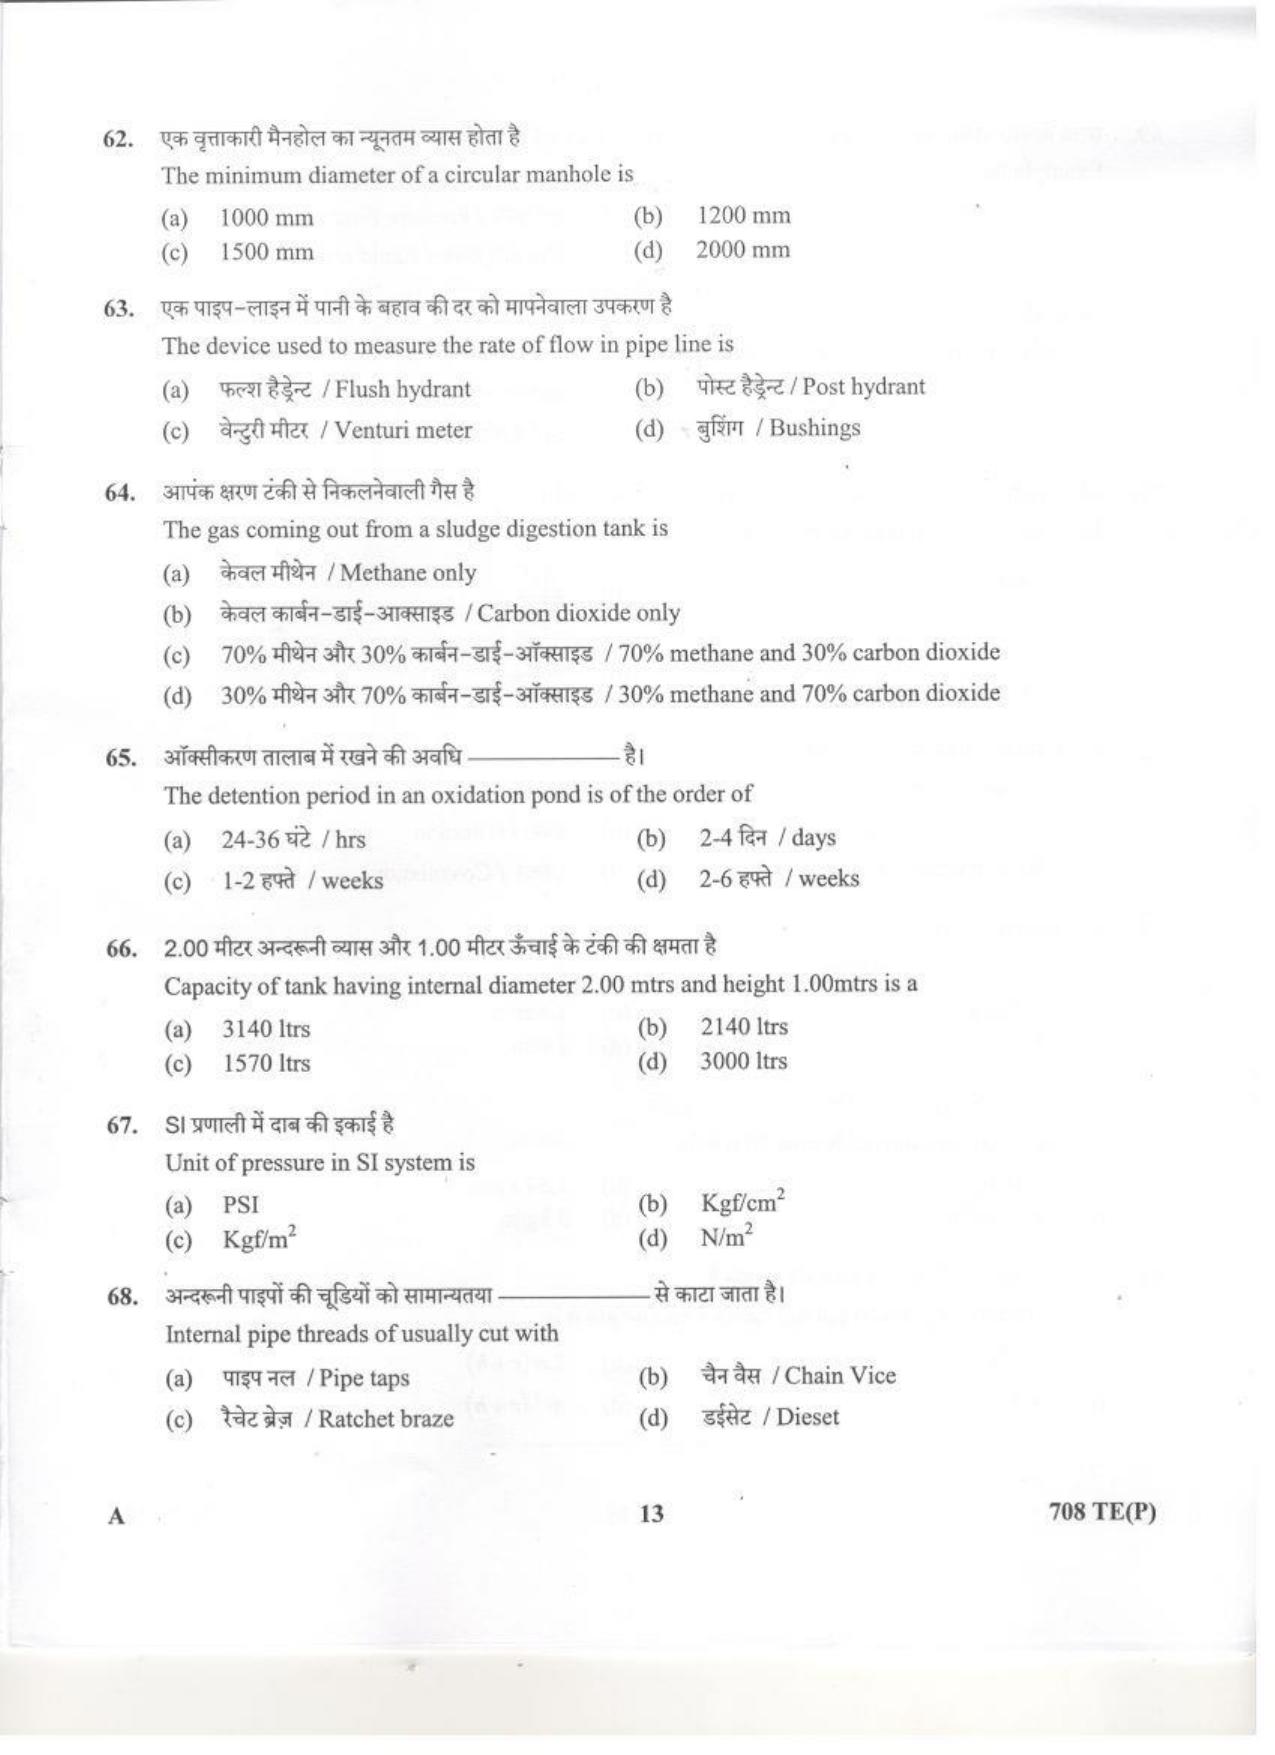 LPSC Technician ‘B’ (Plumber) 2020 Question Paper - Page 12